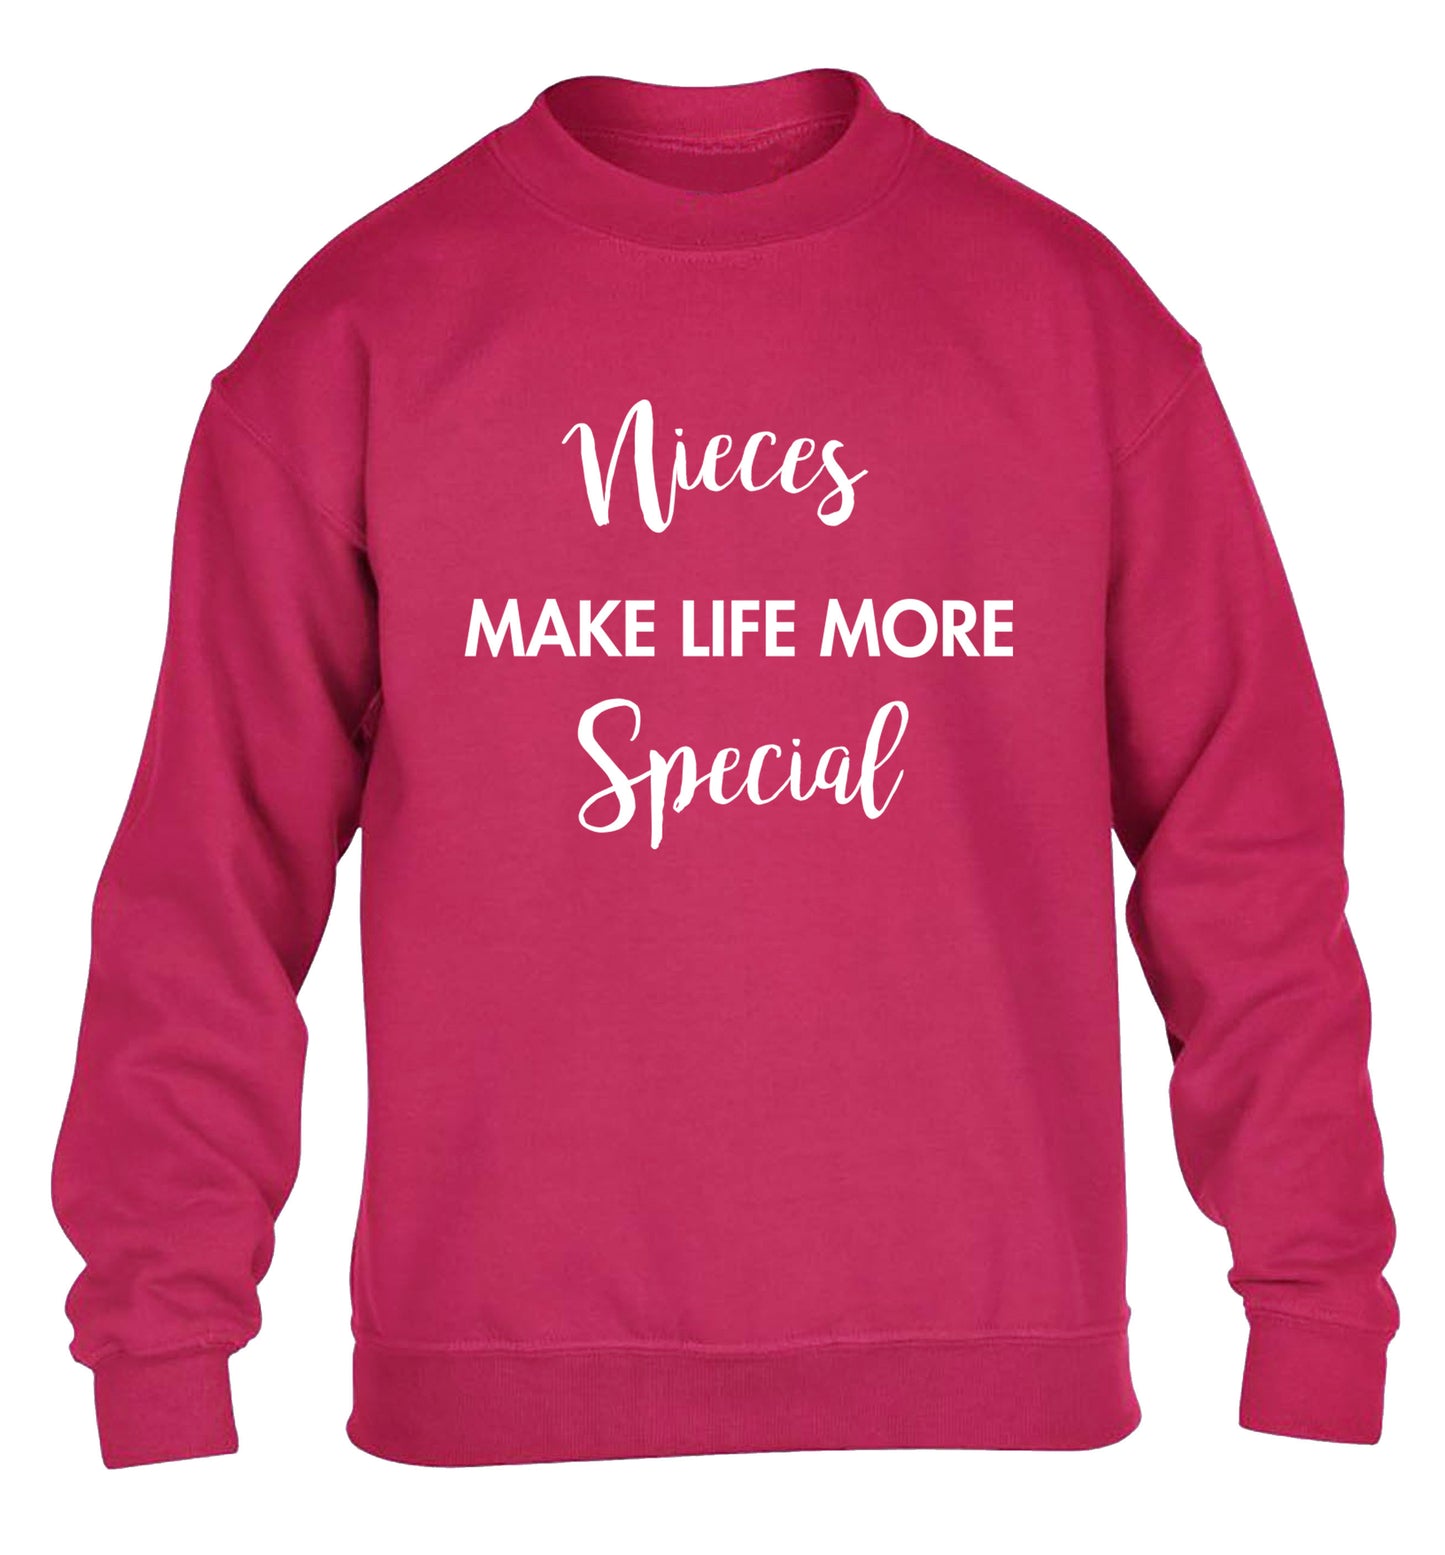 Nieces make life more special children's pink sweater 12-14 Years